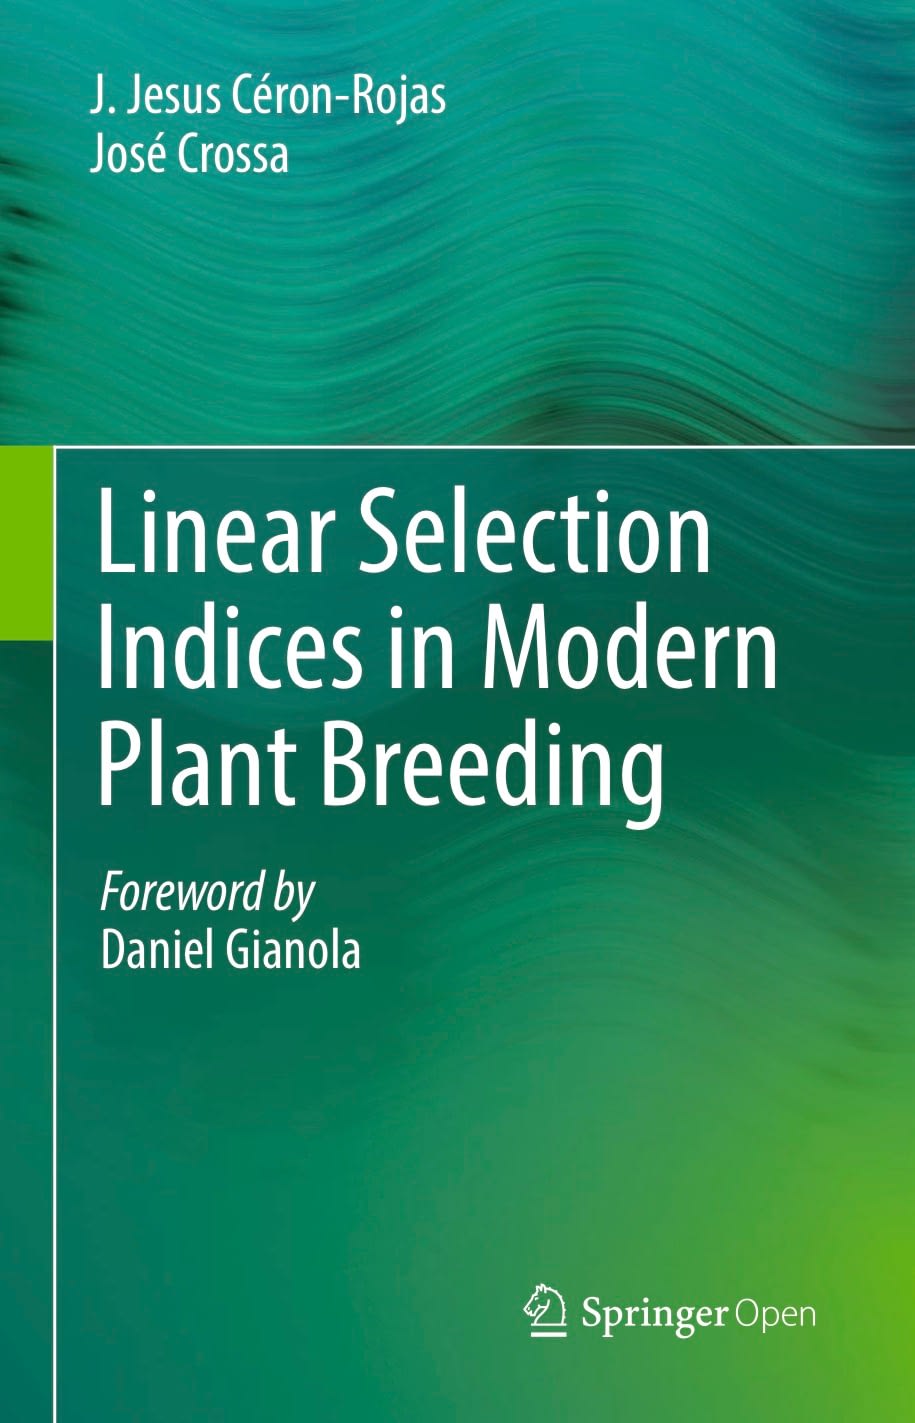 Linear Selection Indices in Modern Plant Breeding